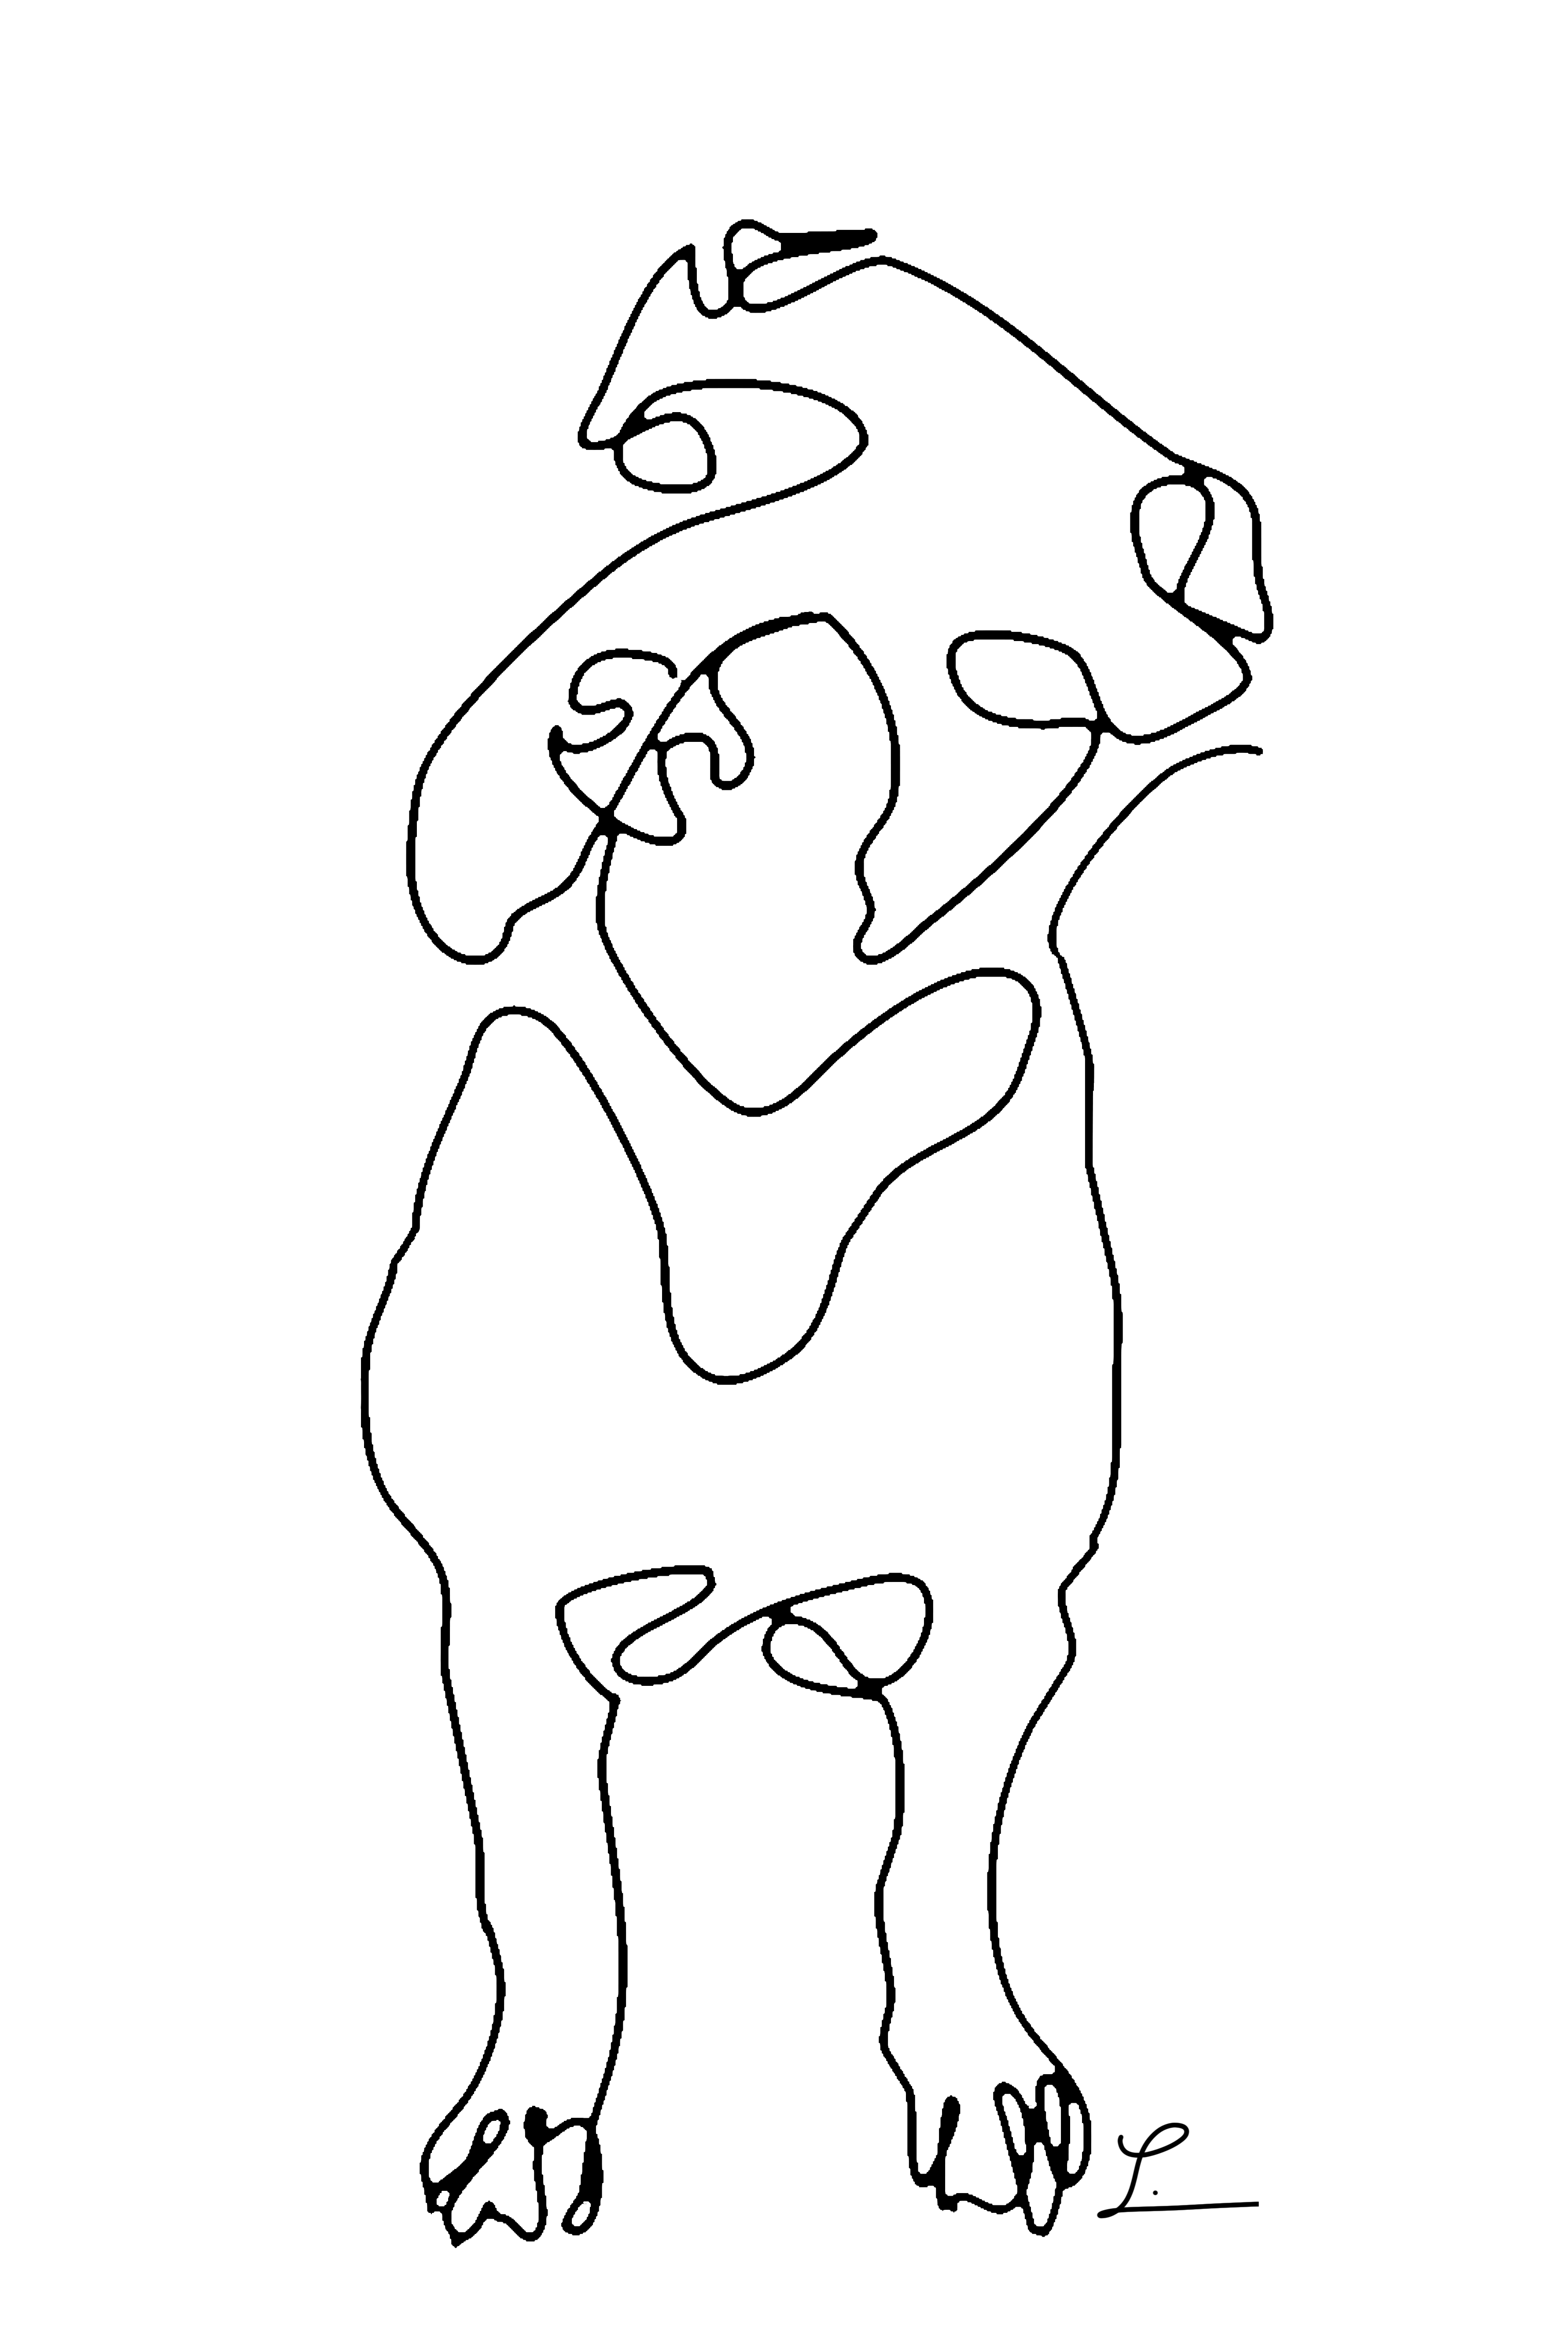 oneline drawing dog